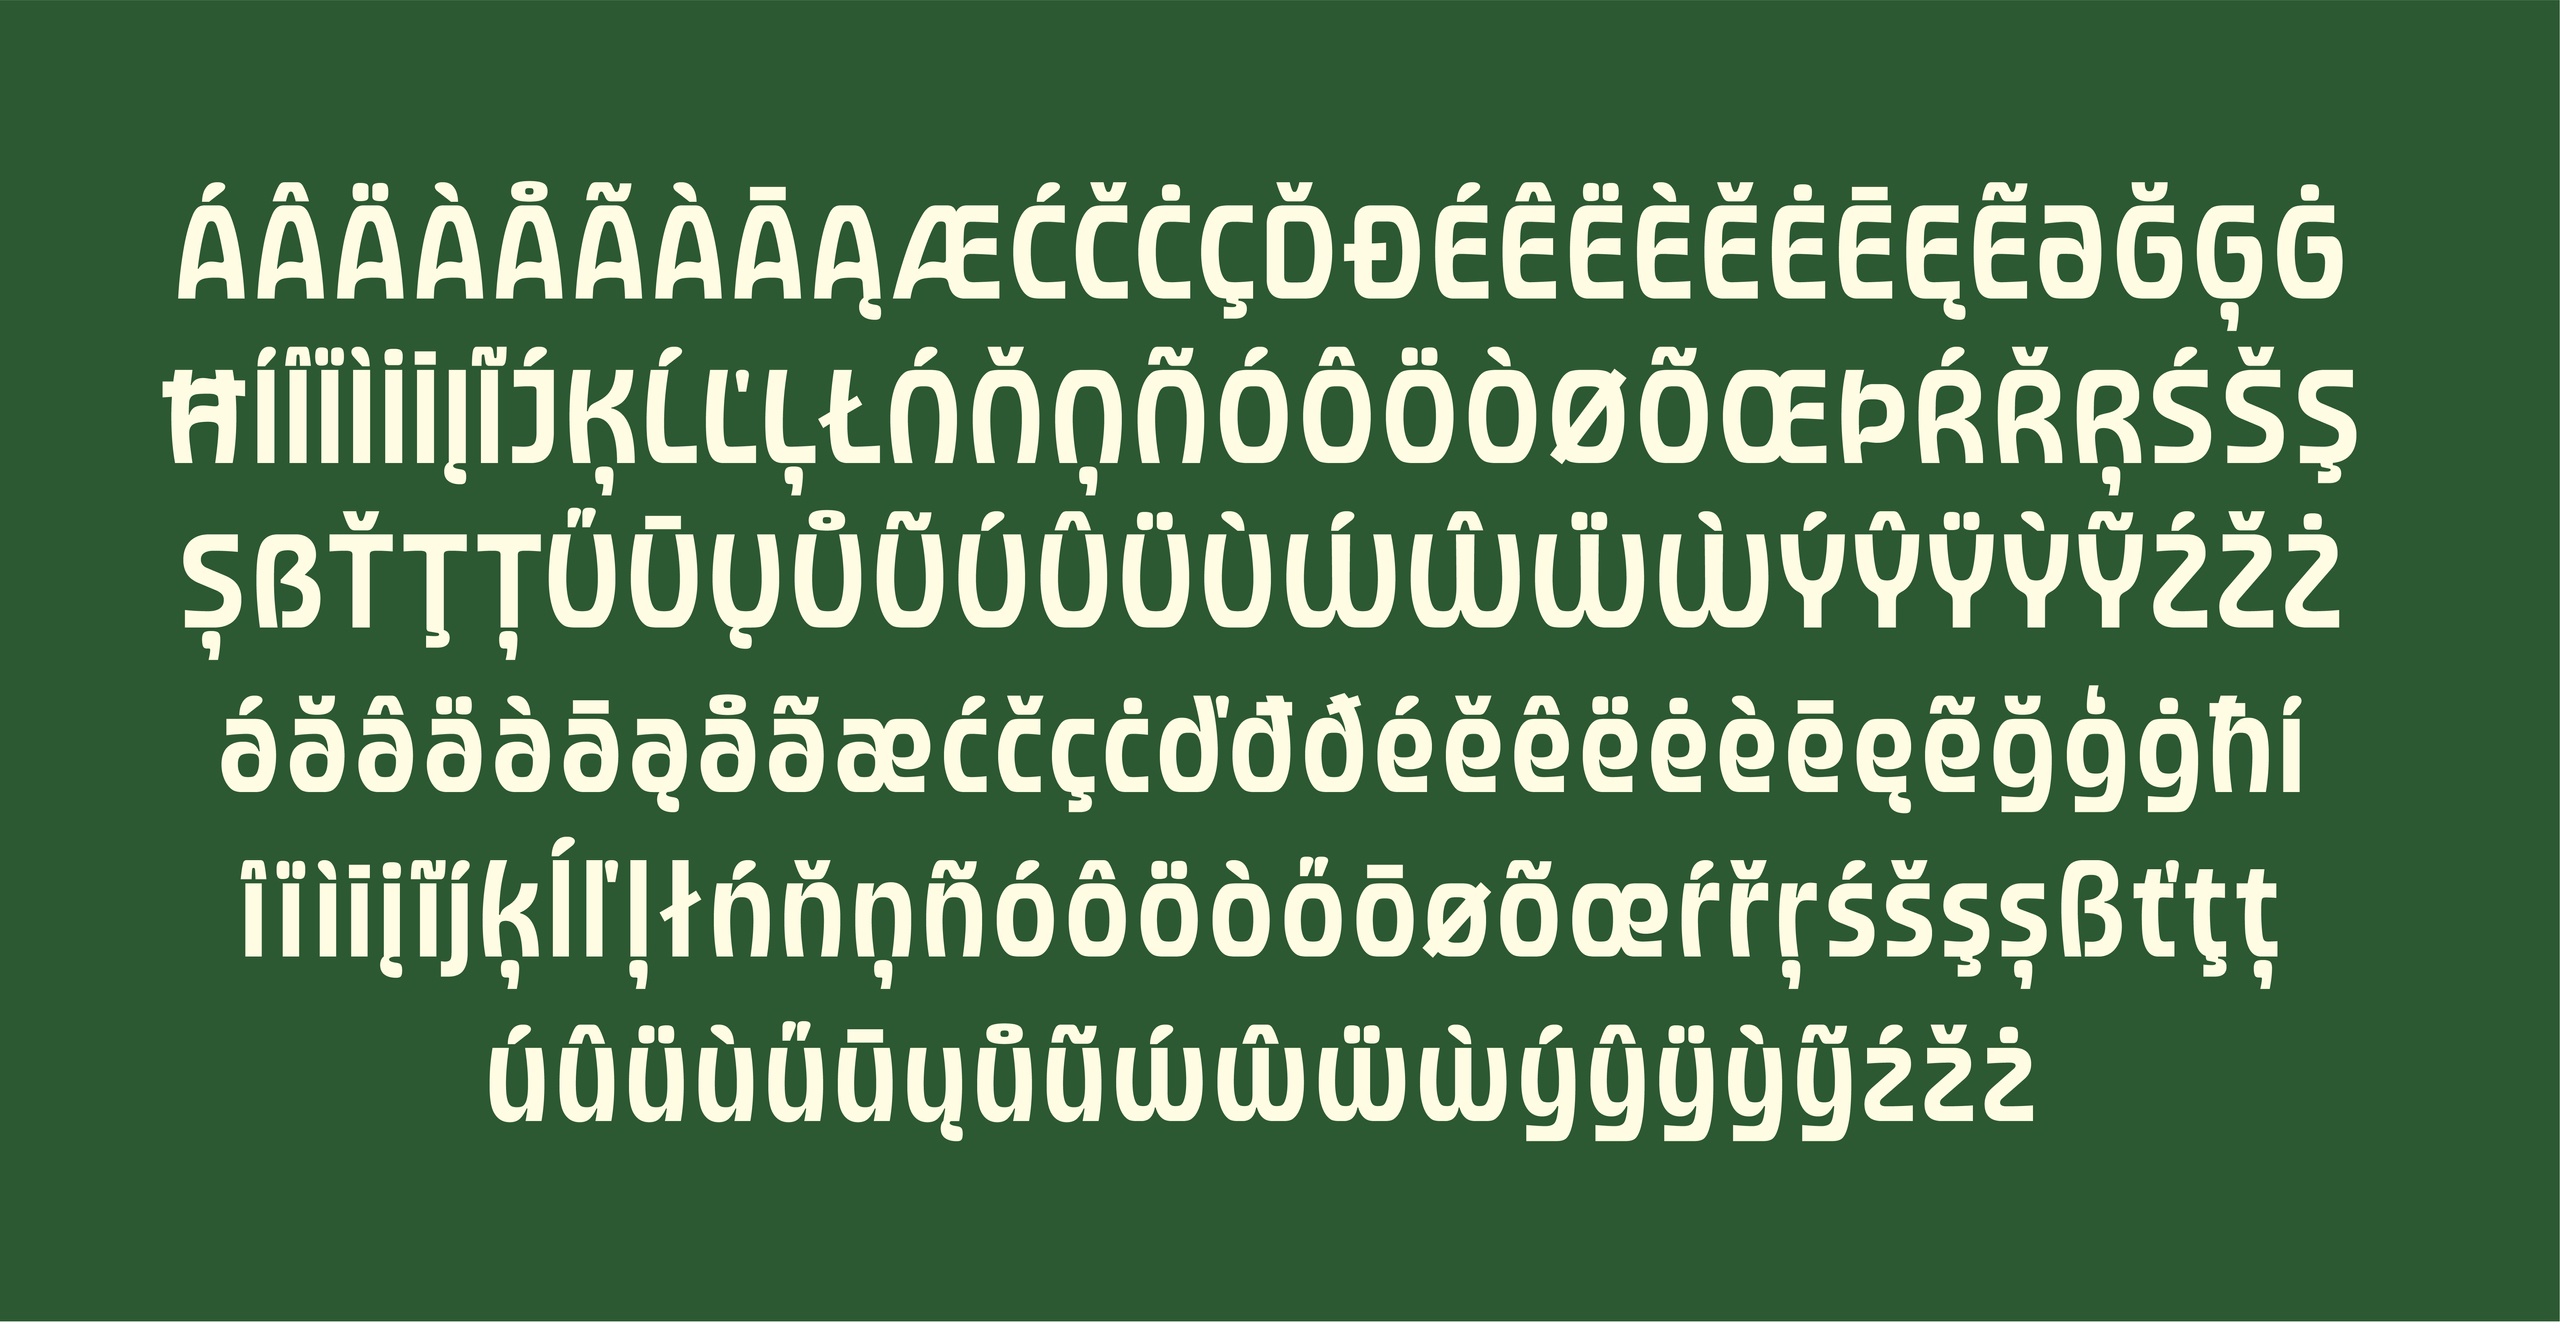 Forager Thin Font preview